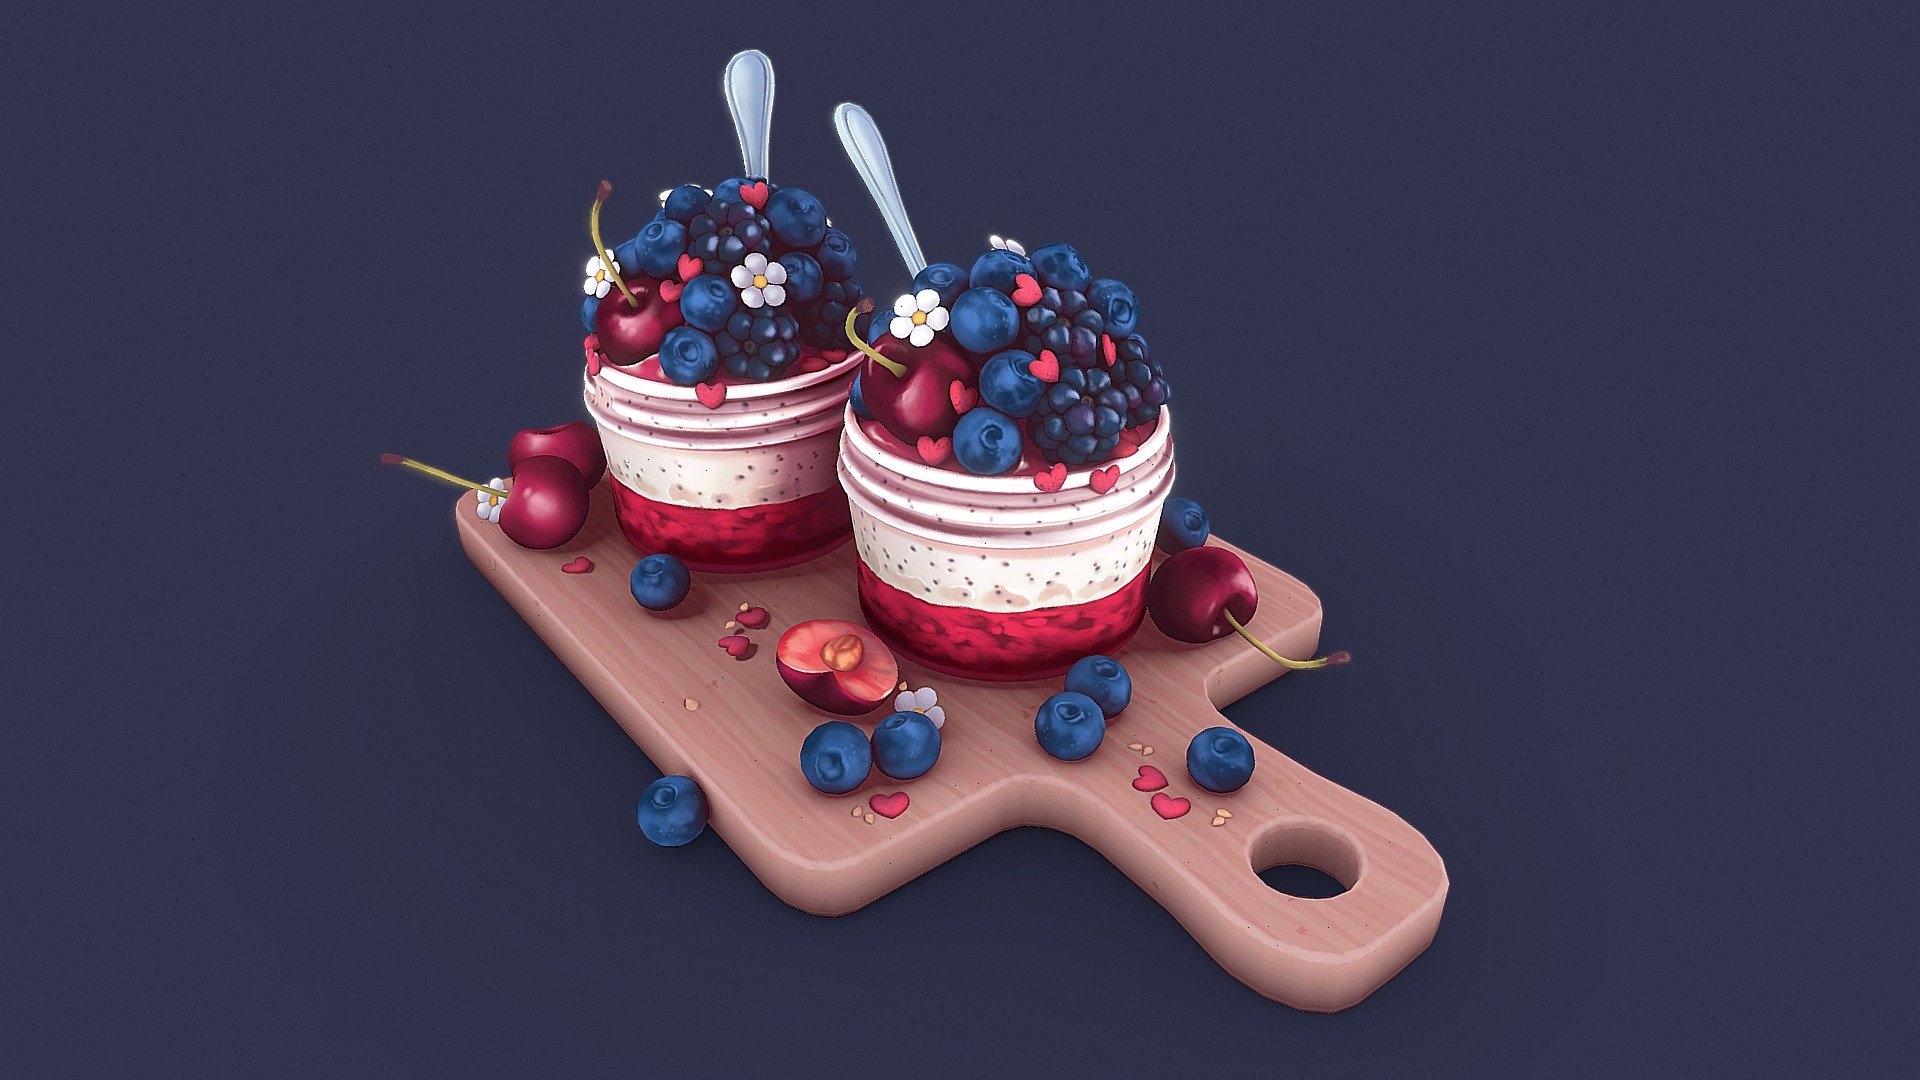 Berries dessert ~  based on a photo (couldn't find the author unfortunatly)
Made with Blender and Substance Painter. Handpainted and unlit 3d model